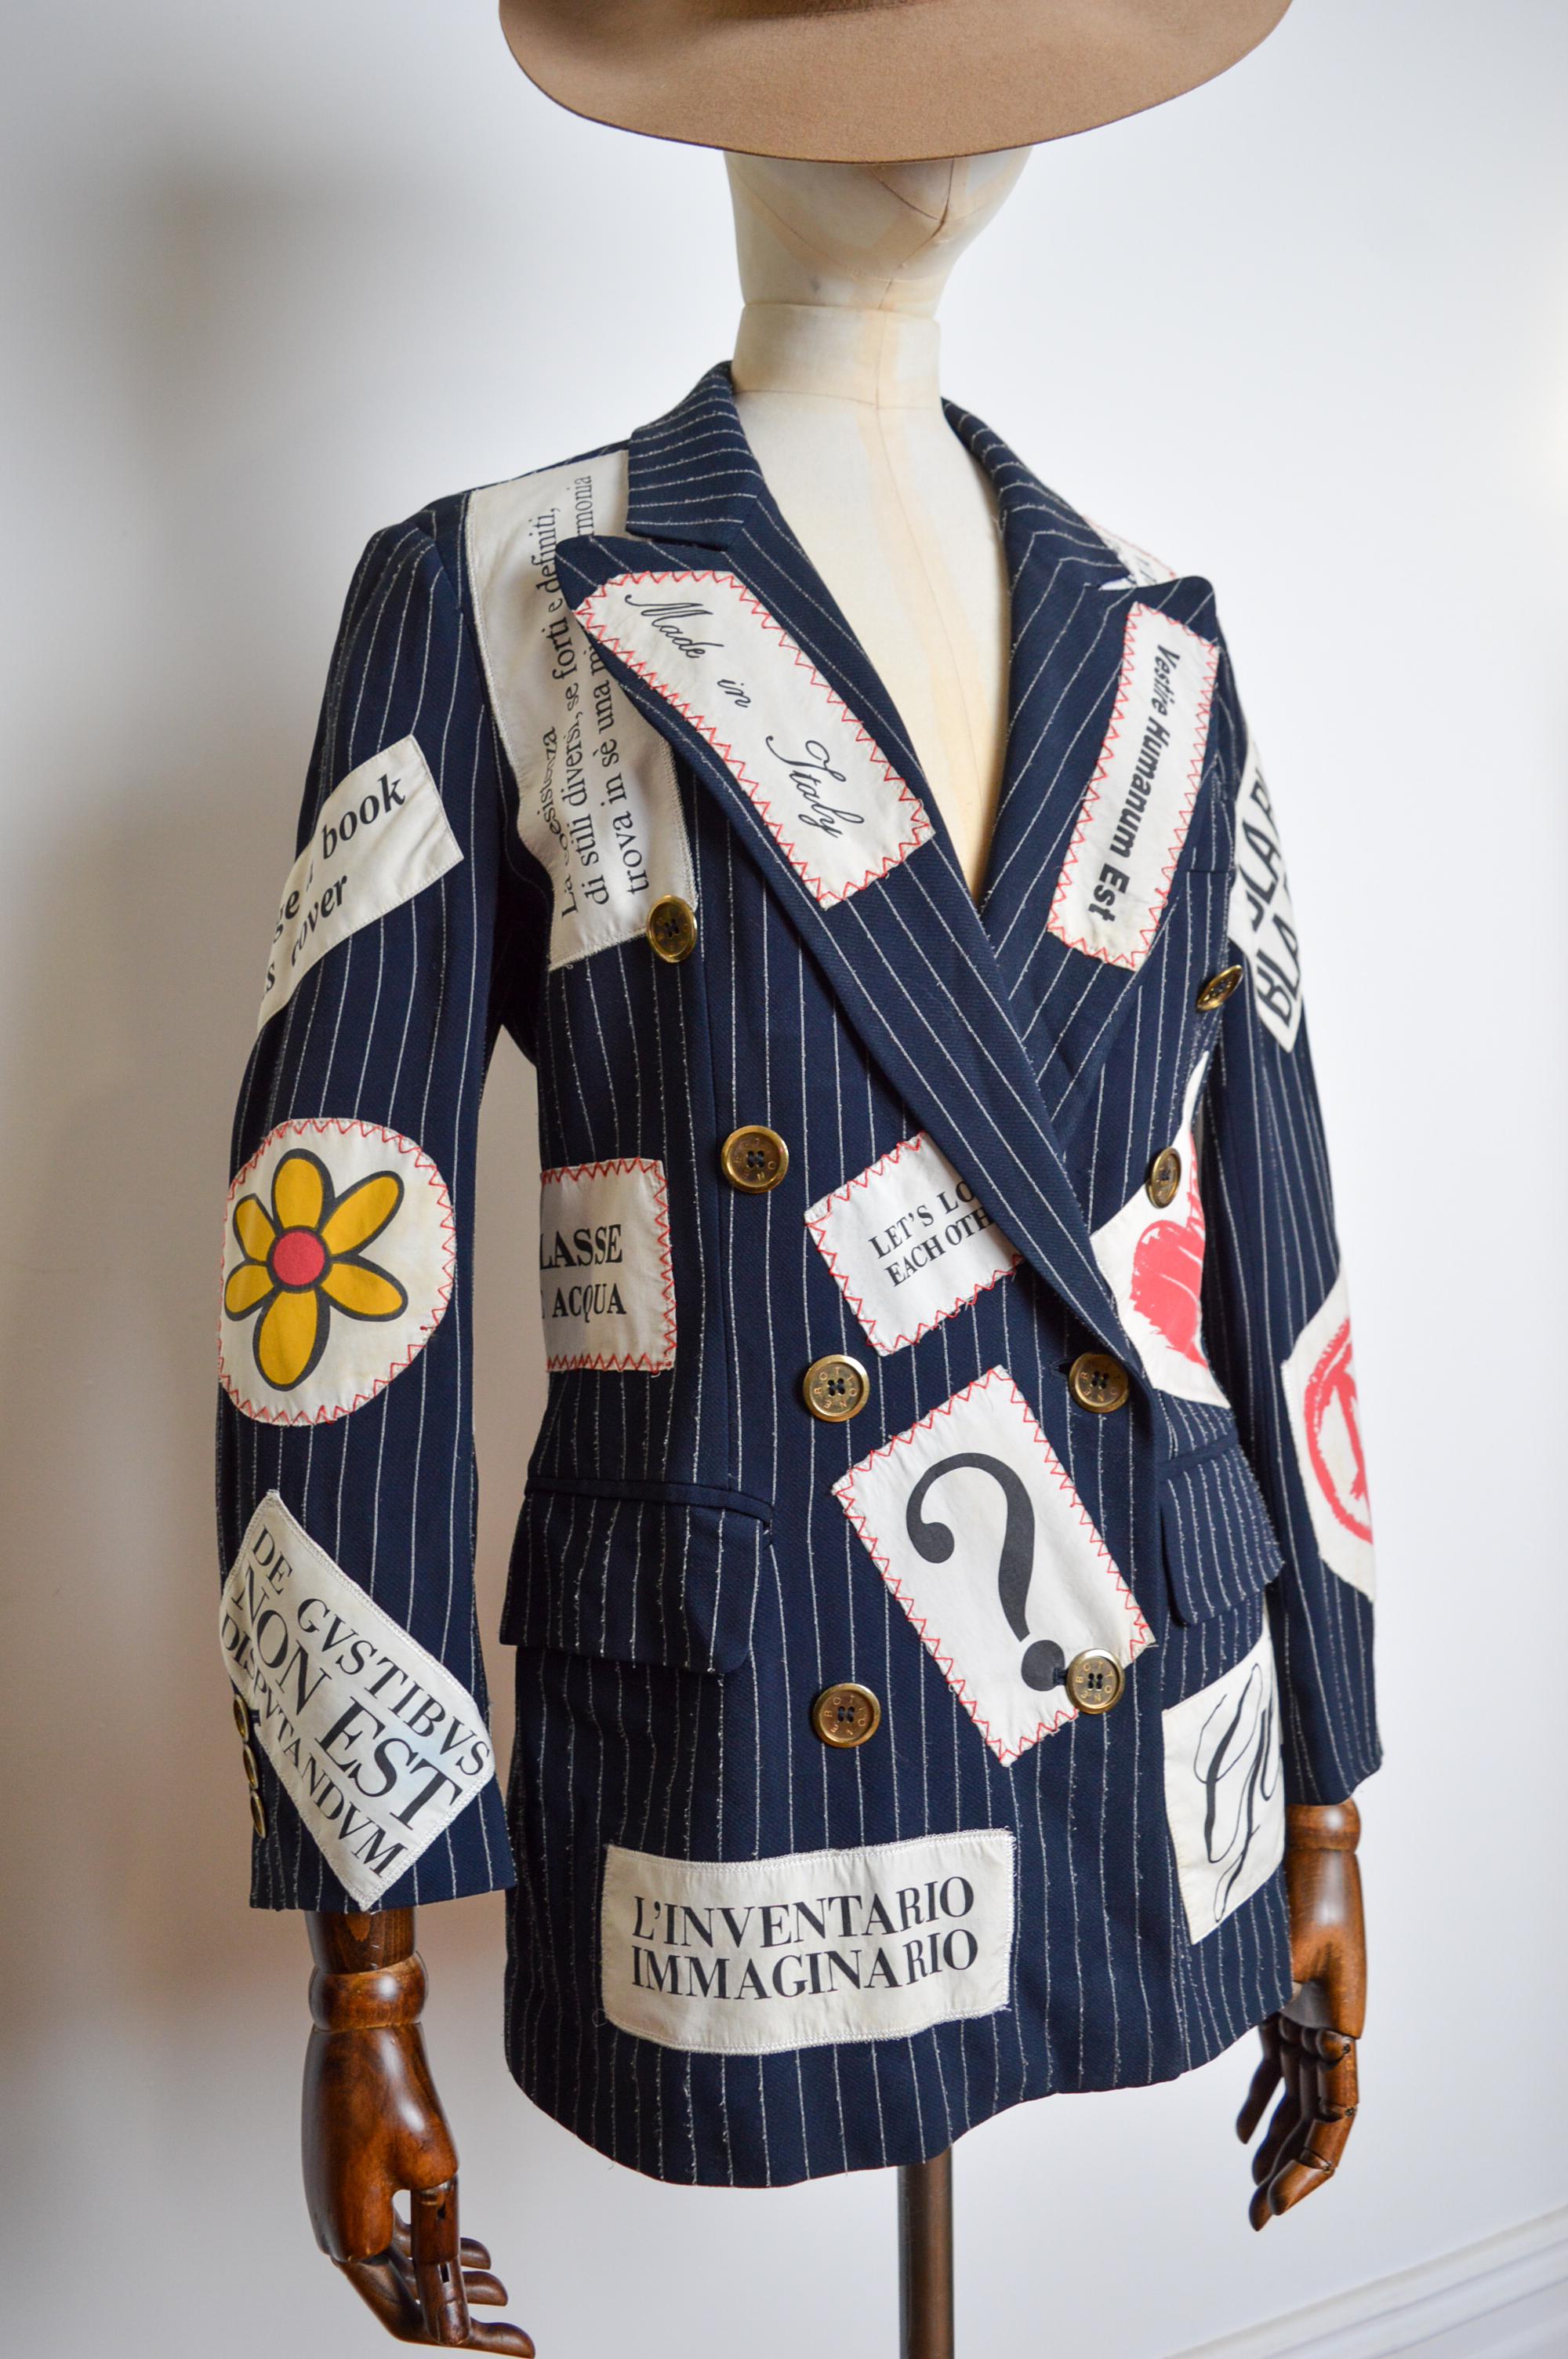 Spring / Summer 1994 MOSCHINO Runway, Hand-sewn Patchwork Blazer Jacket designed by Franco Moschino.

Look 51 / Look 54 Catwalk Reference.

MADE IN ITALY.   

This Superb, Archival Vintage Jacket is crafted from a Pinstriped cloth with Hand-sewn